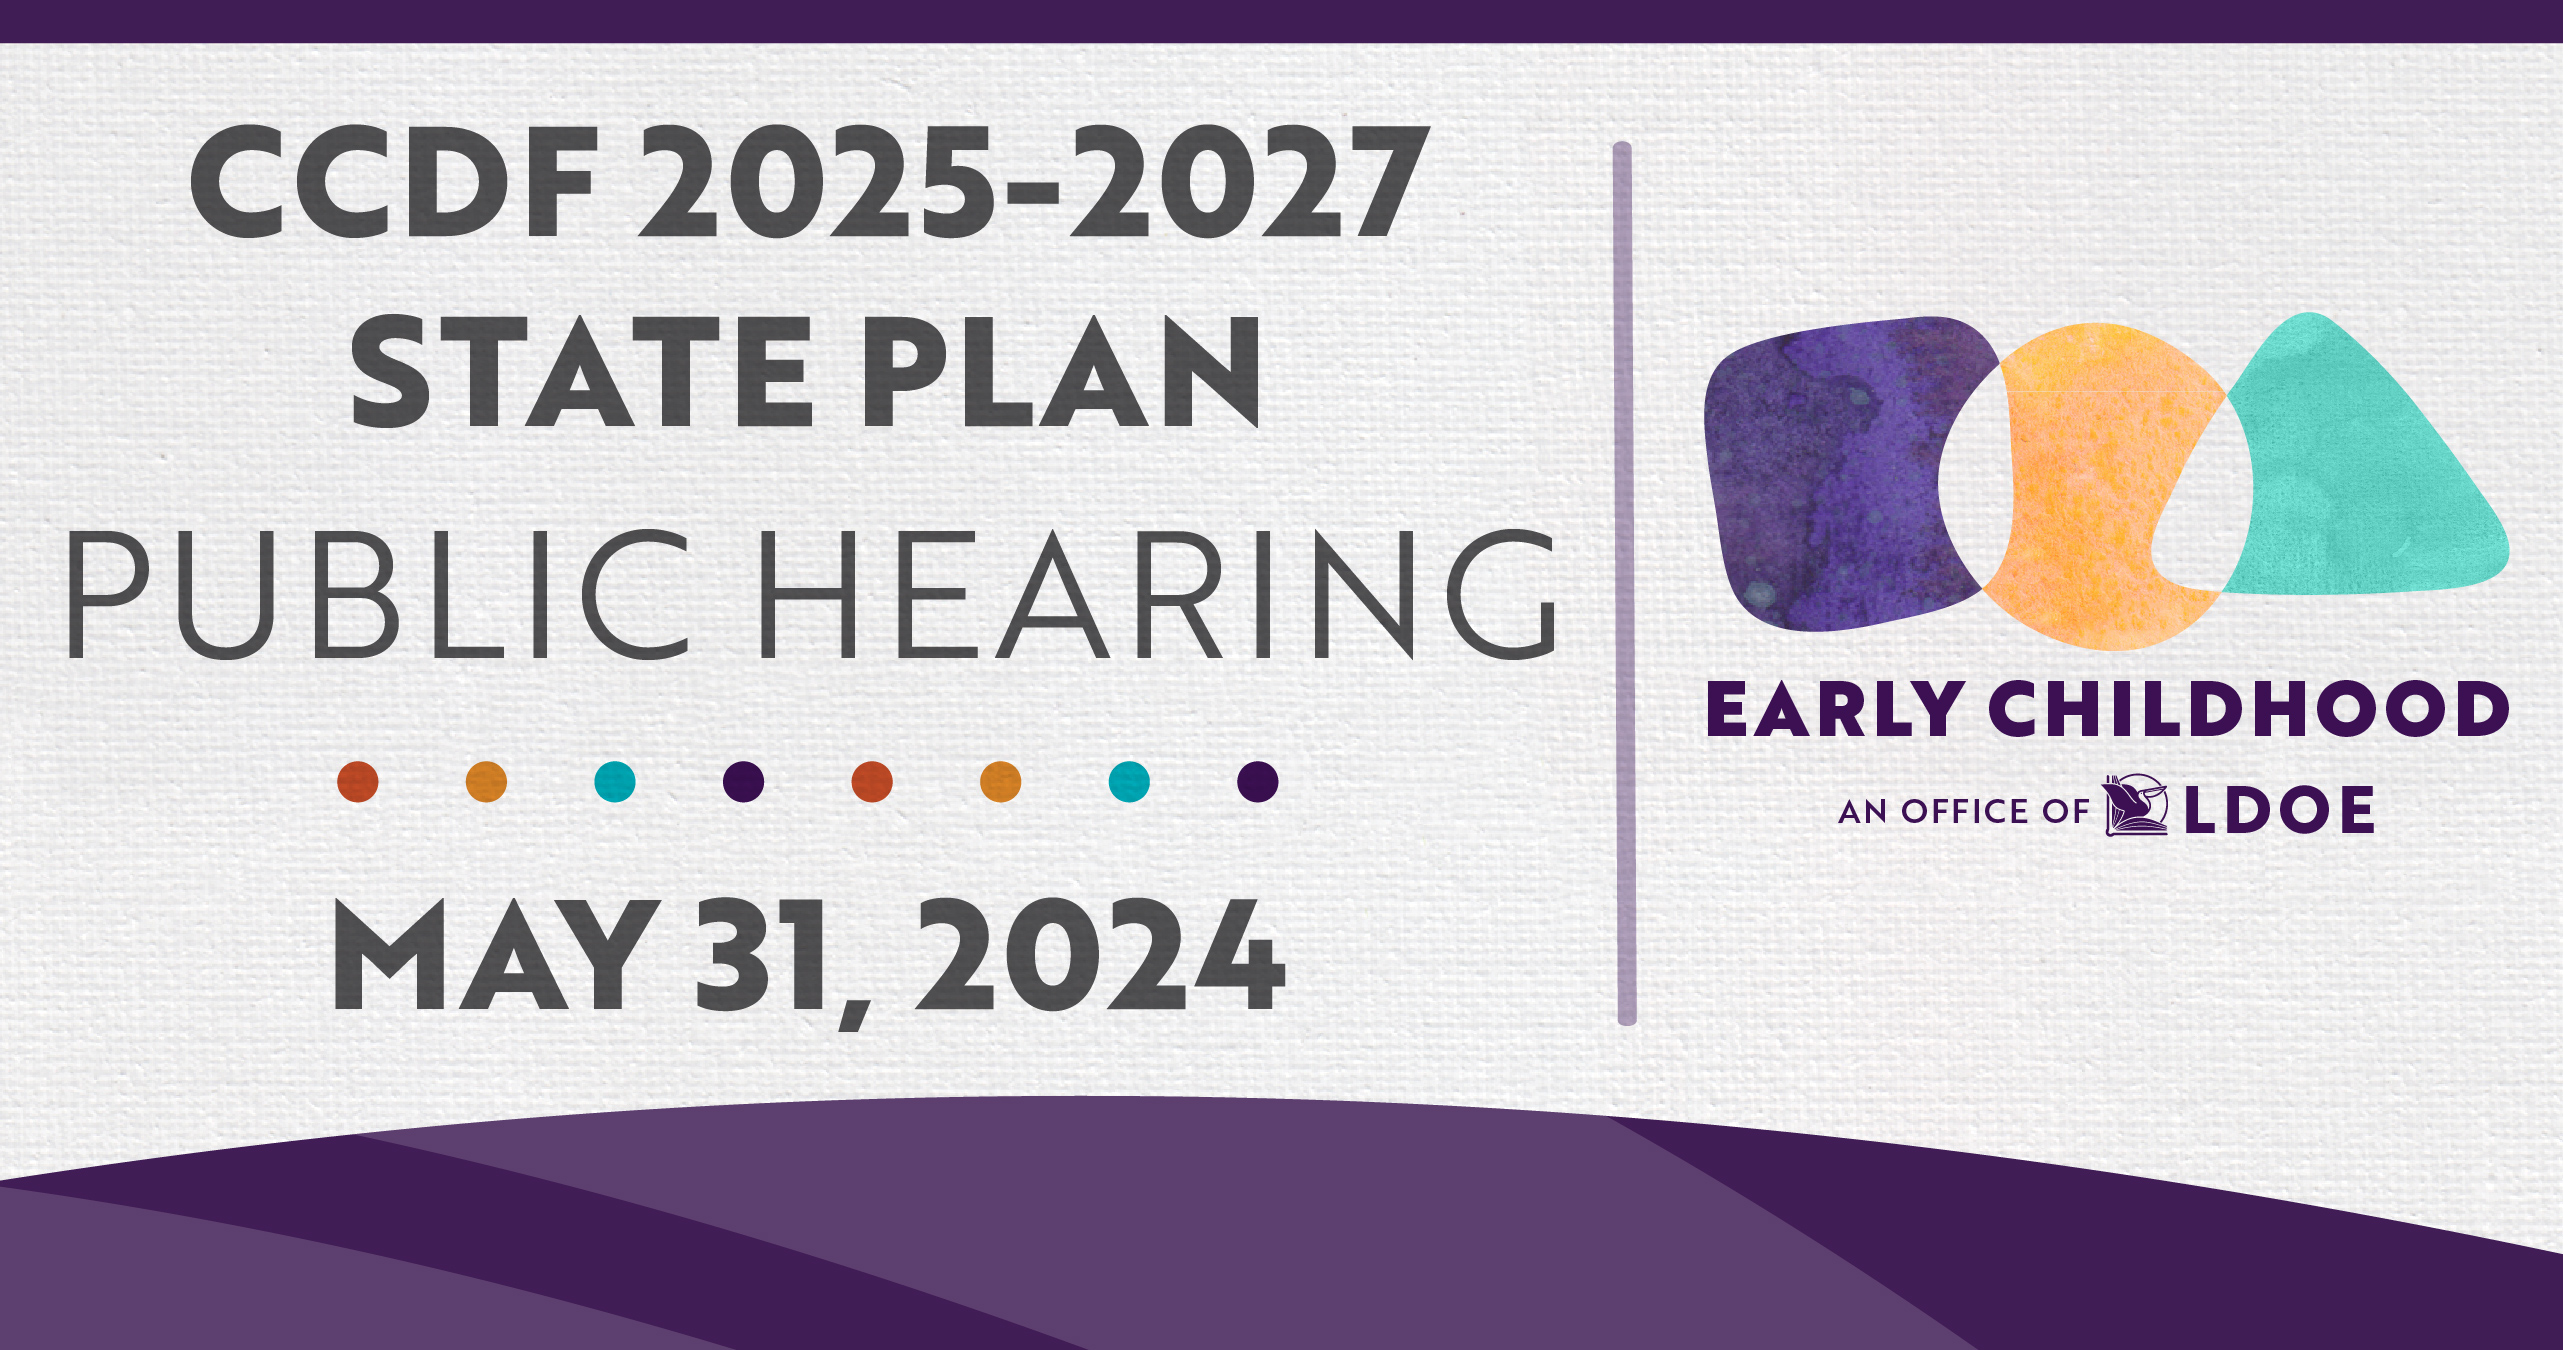 CCDF 2025-2027 State Plan Public Hearing - May 31, 2024. Early Childhood, an office of the LDOE.